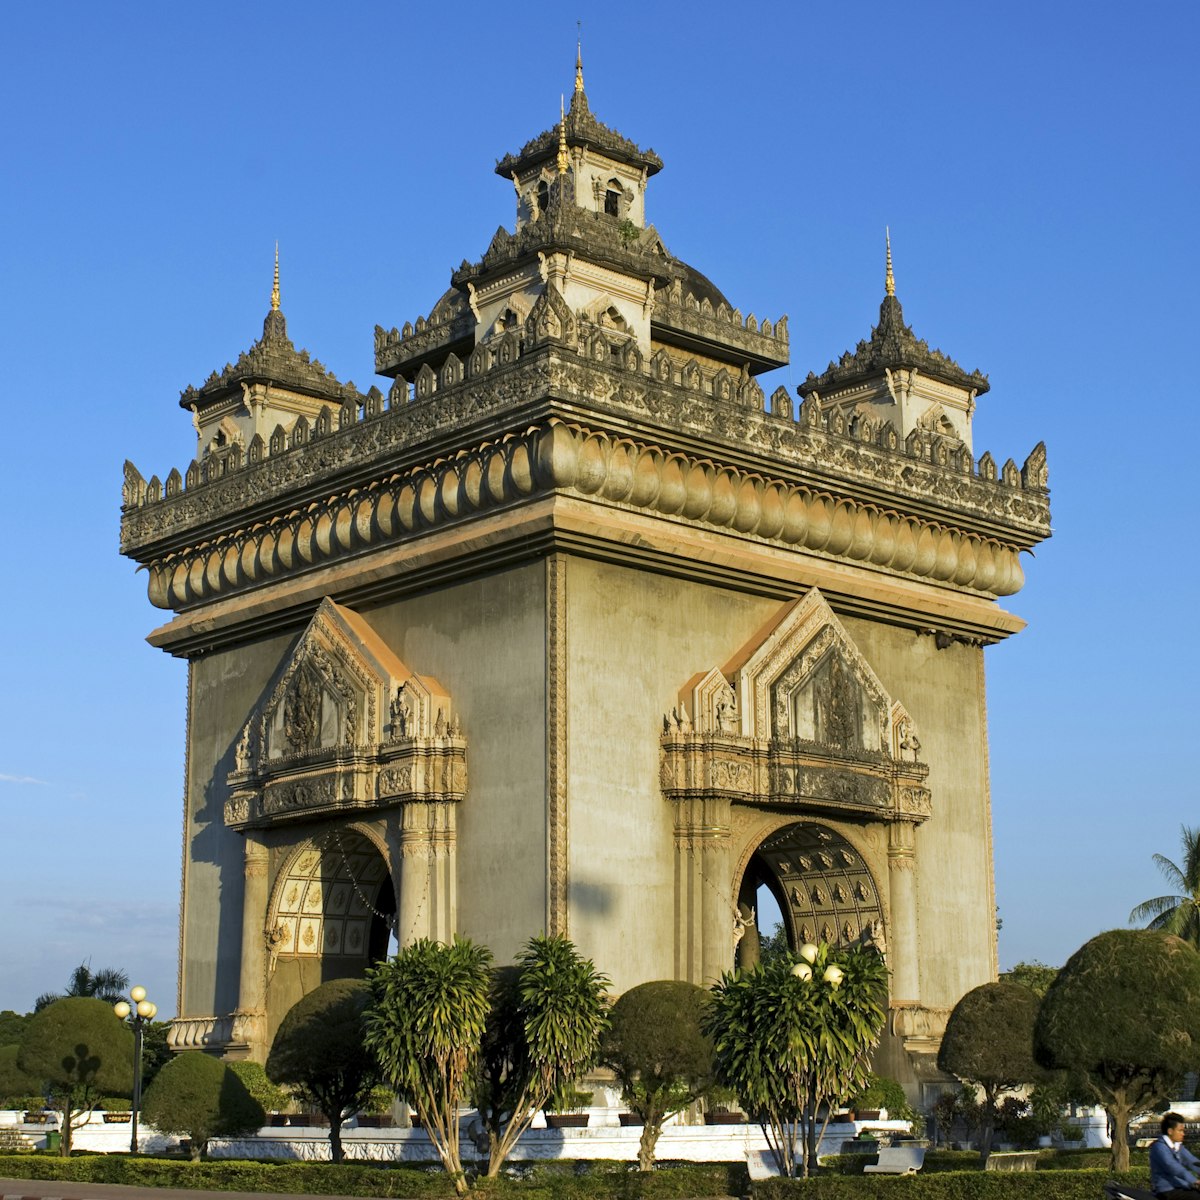 Laos, Vientiane, Arc de Triomphe. The Victory Gate, Gate of Triumph or Patuxai is a war monument in the centre of Vientiane which was built between 1957 and 1968 by the French.